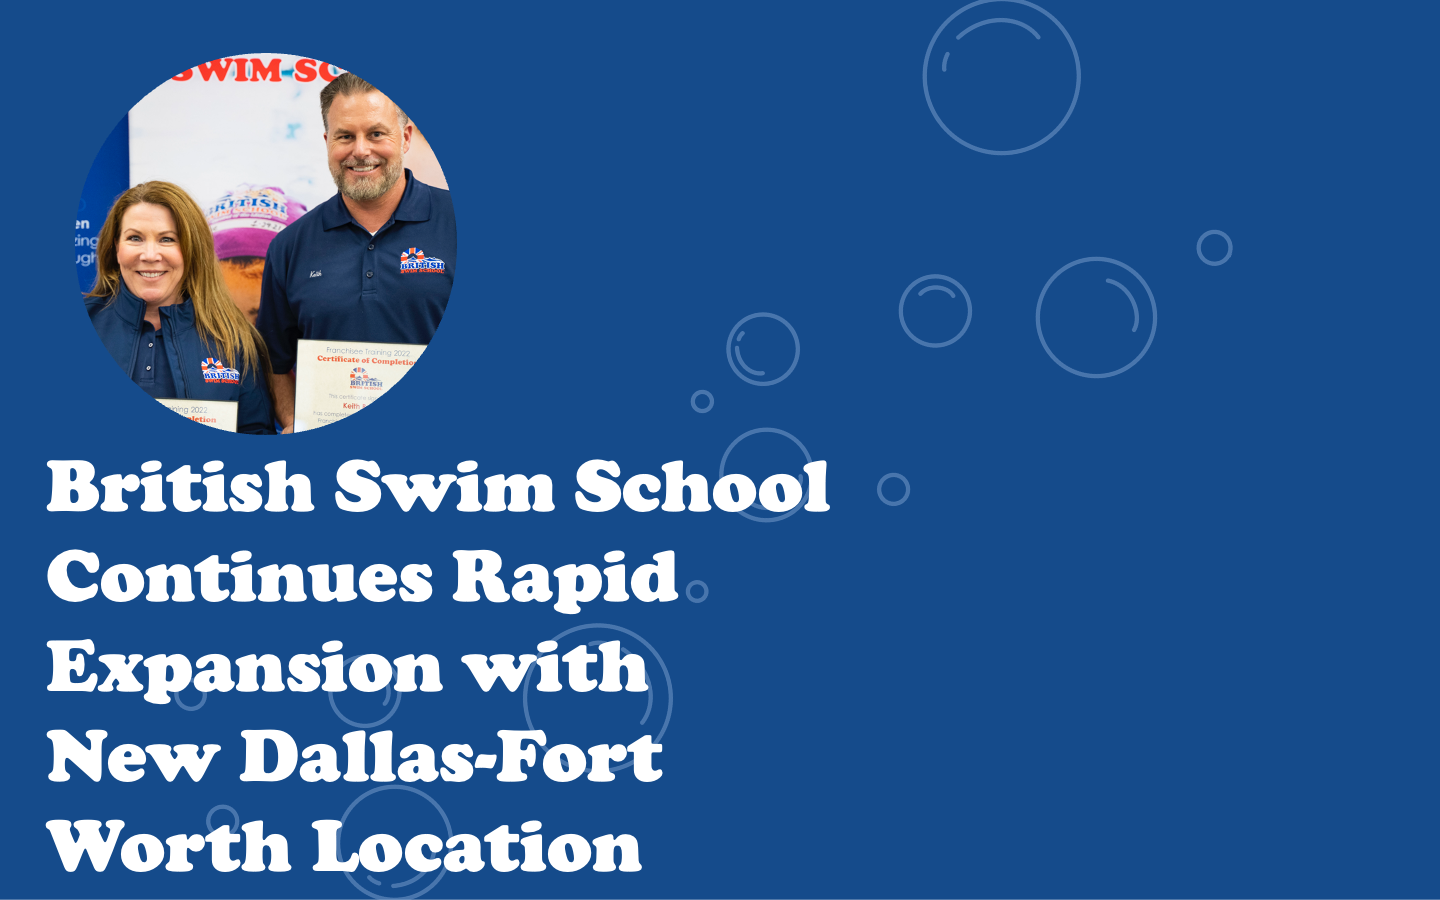 Image of British Swim School Continues Rapid Expansion with New Dallas-Fort Worth Location